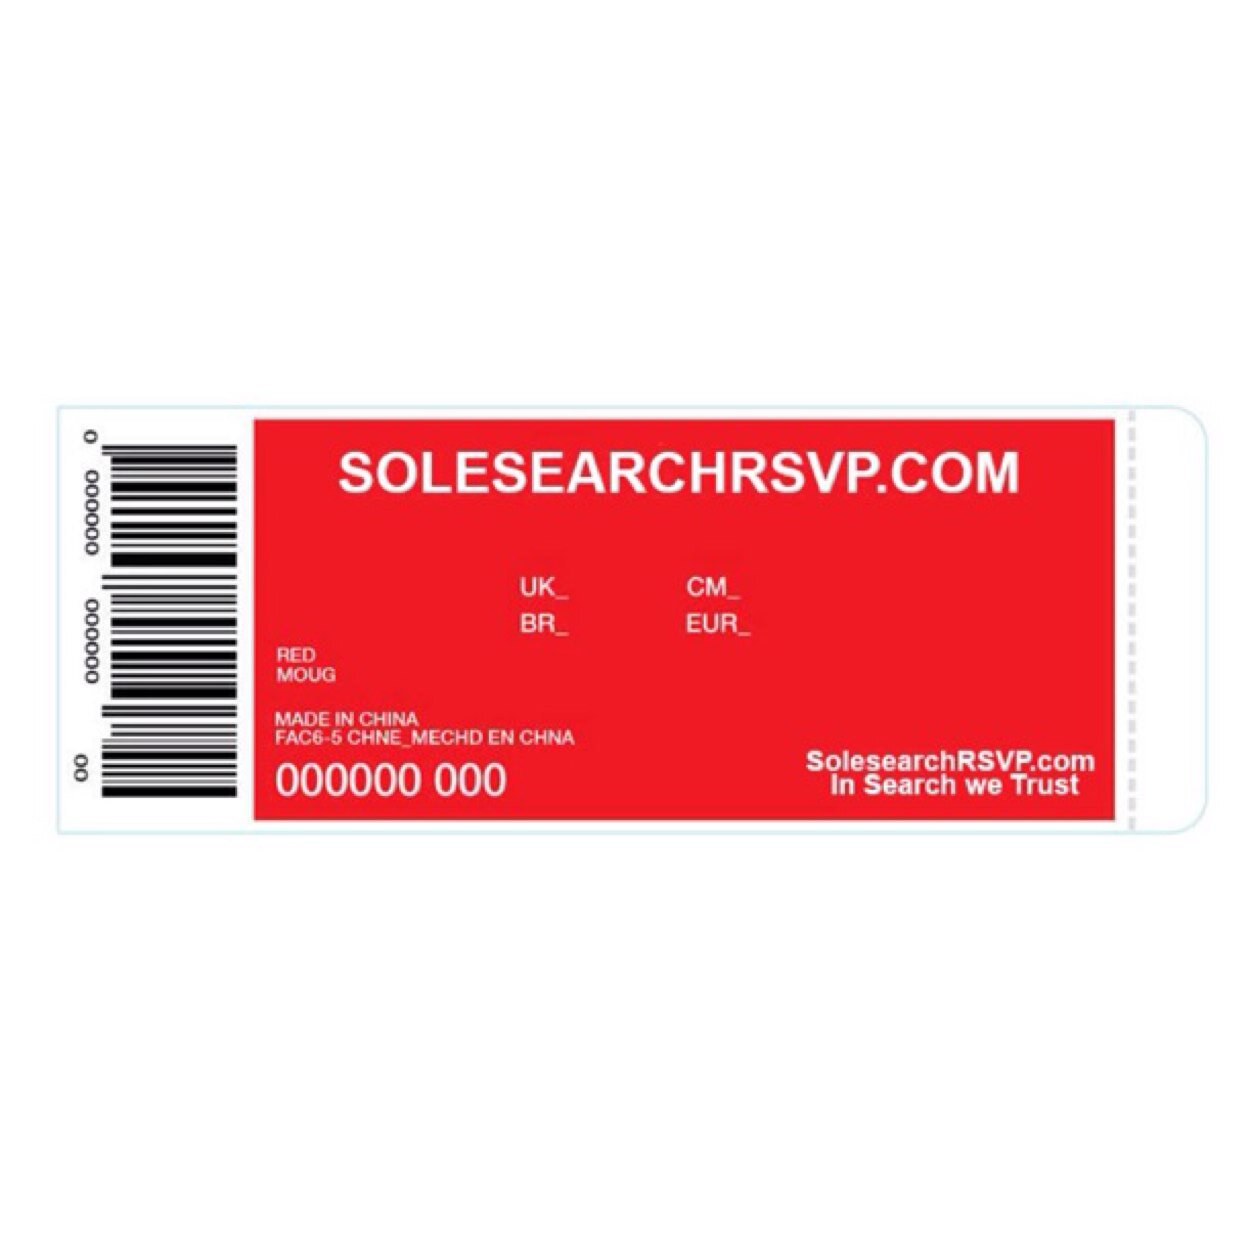 RSVP the latest releases here w/ no risk or 100% refund no questions asked. #solesearchRSVP (562)485-8596 text only